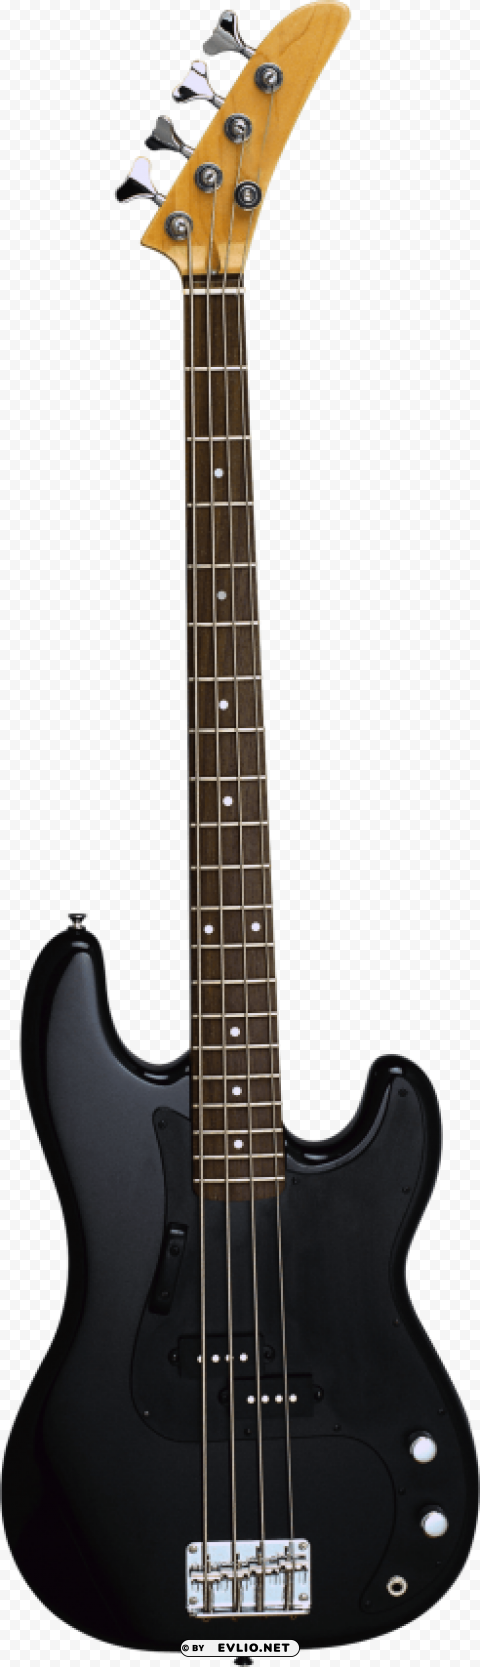 electric guitar black Isolated Illustration with Clear Background PNG